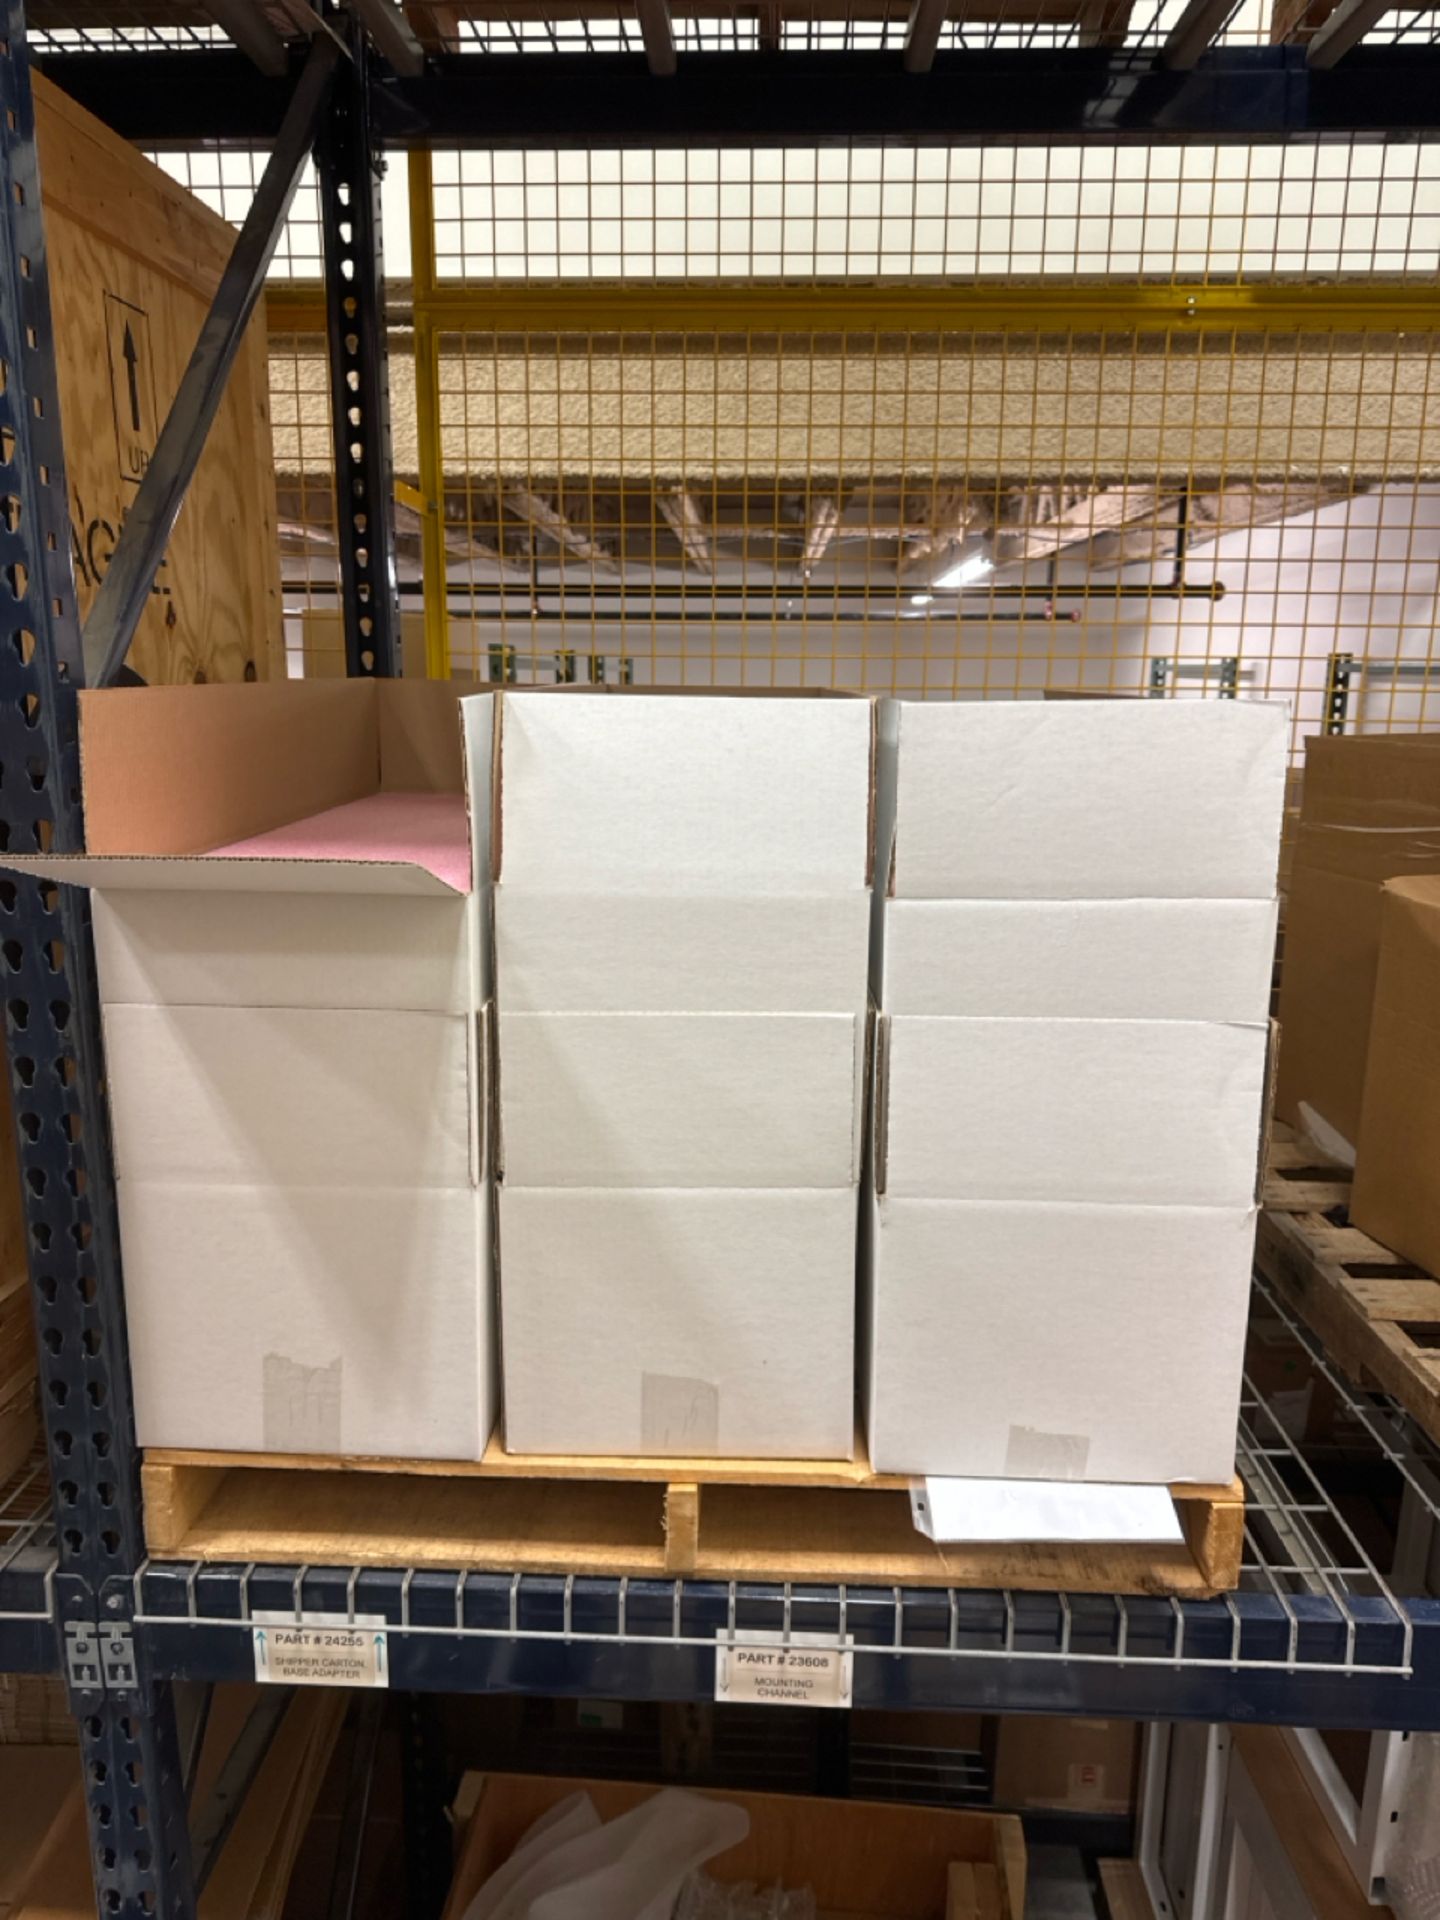 Contents of Center Pallet Racking - Image 51 of 68